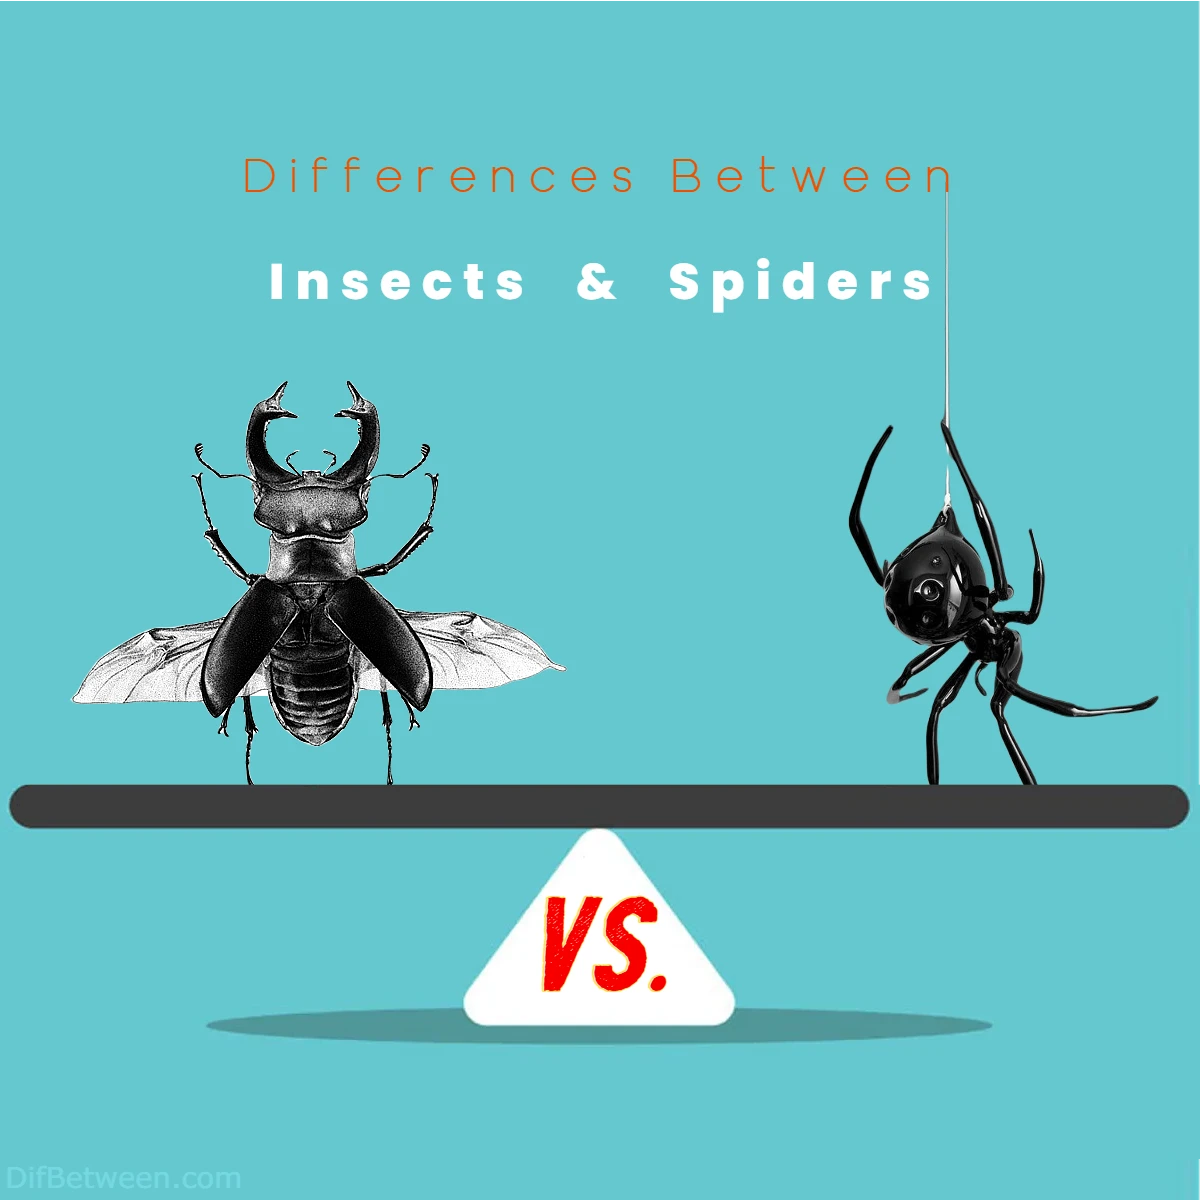 Differences Between Insects vs Spiders